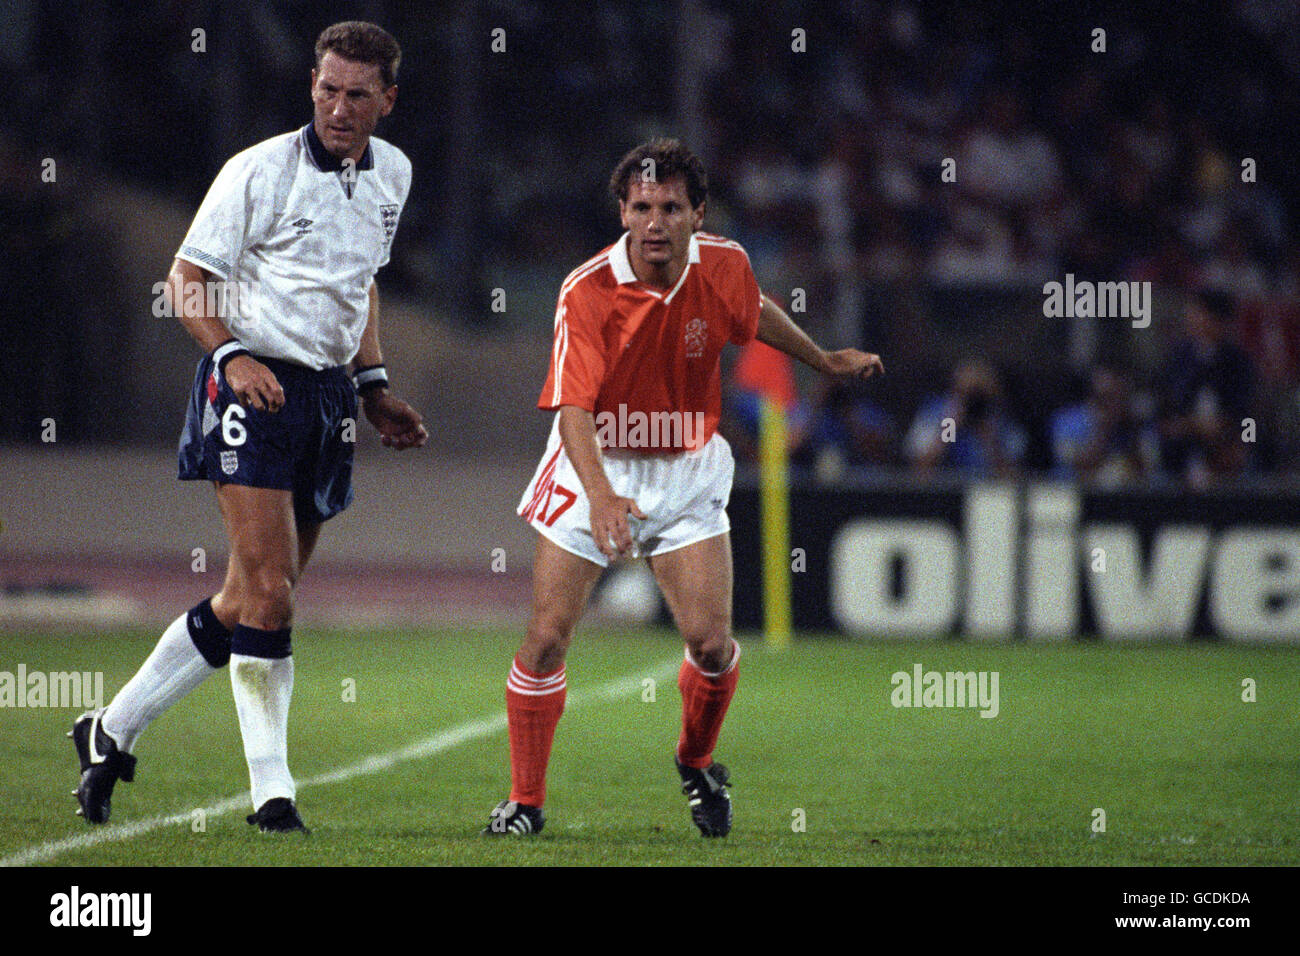 soccer - FIFA World Cup Italia 90 - Group F - England v Holland - Stadio Sant'Elia, Cagliari. England's Terry Butcher (l) and Holland's Hans Gillhaus (r) Stock Photo